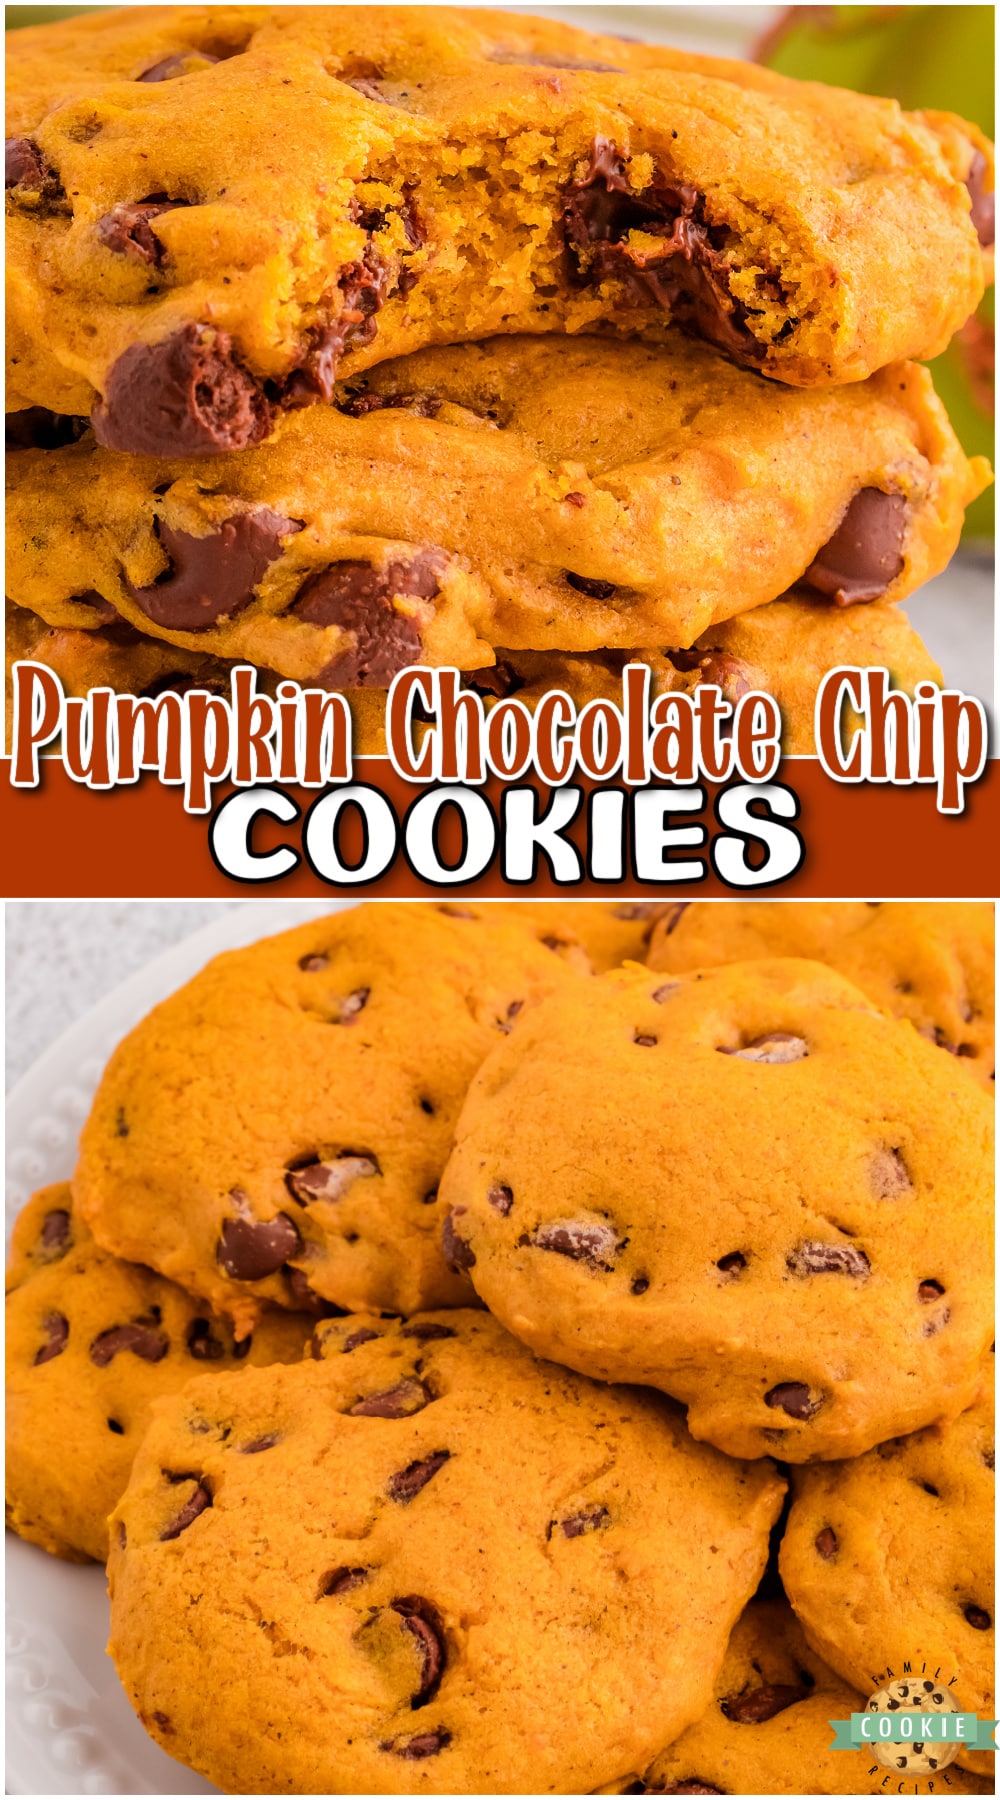 Spiced Pumpkin Chocolate Chip Cookies are made with pumpkin & a fantastic blend of Fall spices!! This pumpkin chocolate chip cookies recipe yields soft, pillowy cookies made with classic ingredients!